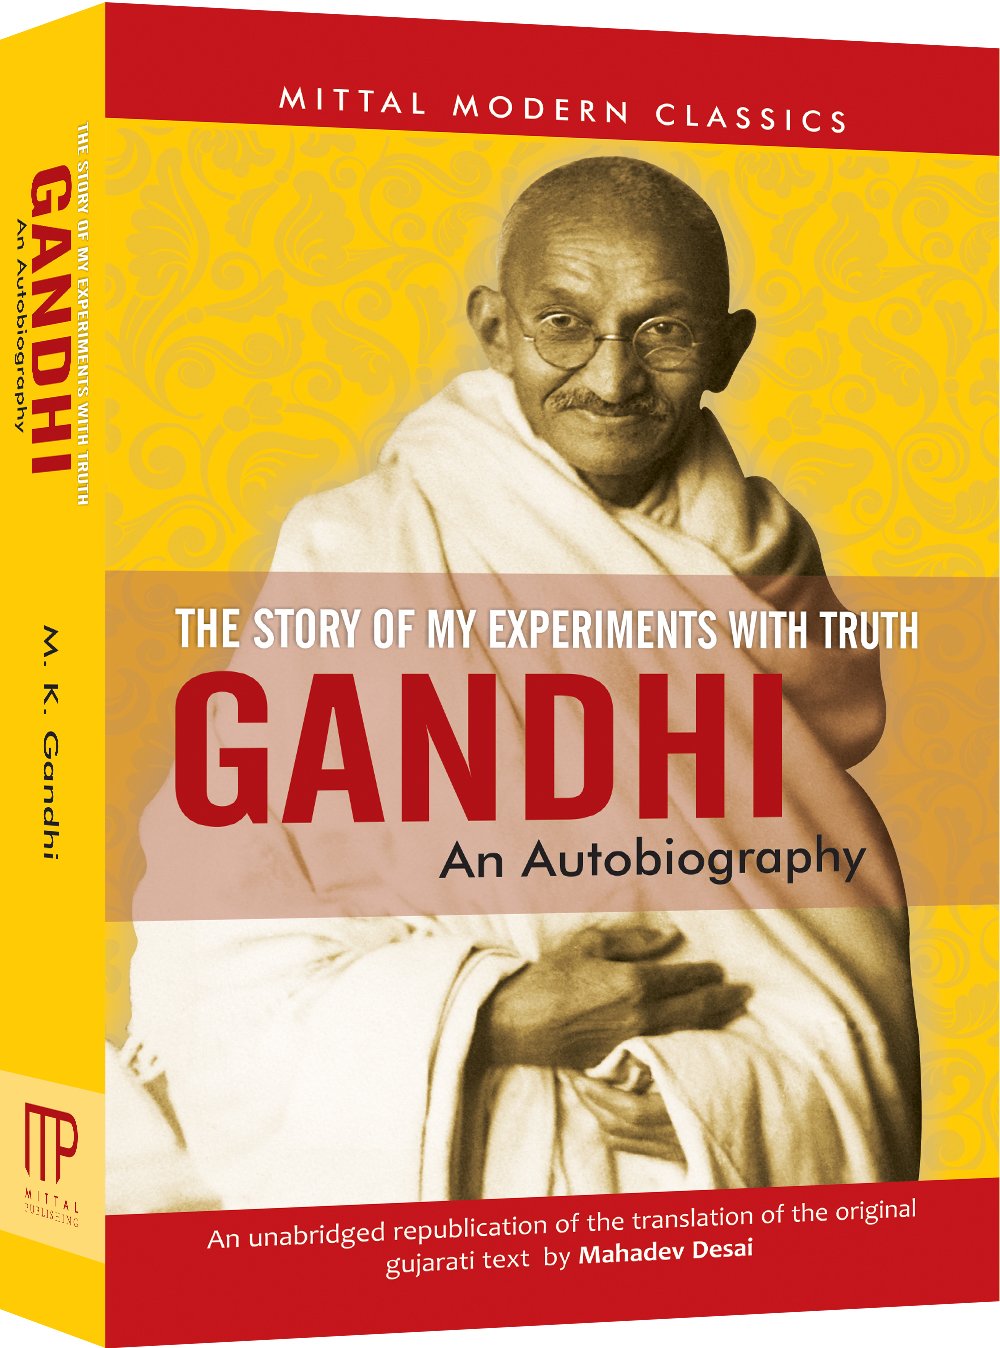 Mahatma Gandhi Autobiography Book: The Story Of My Experiments With Truth